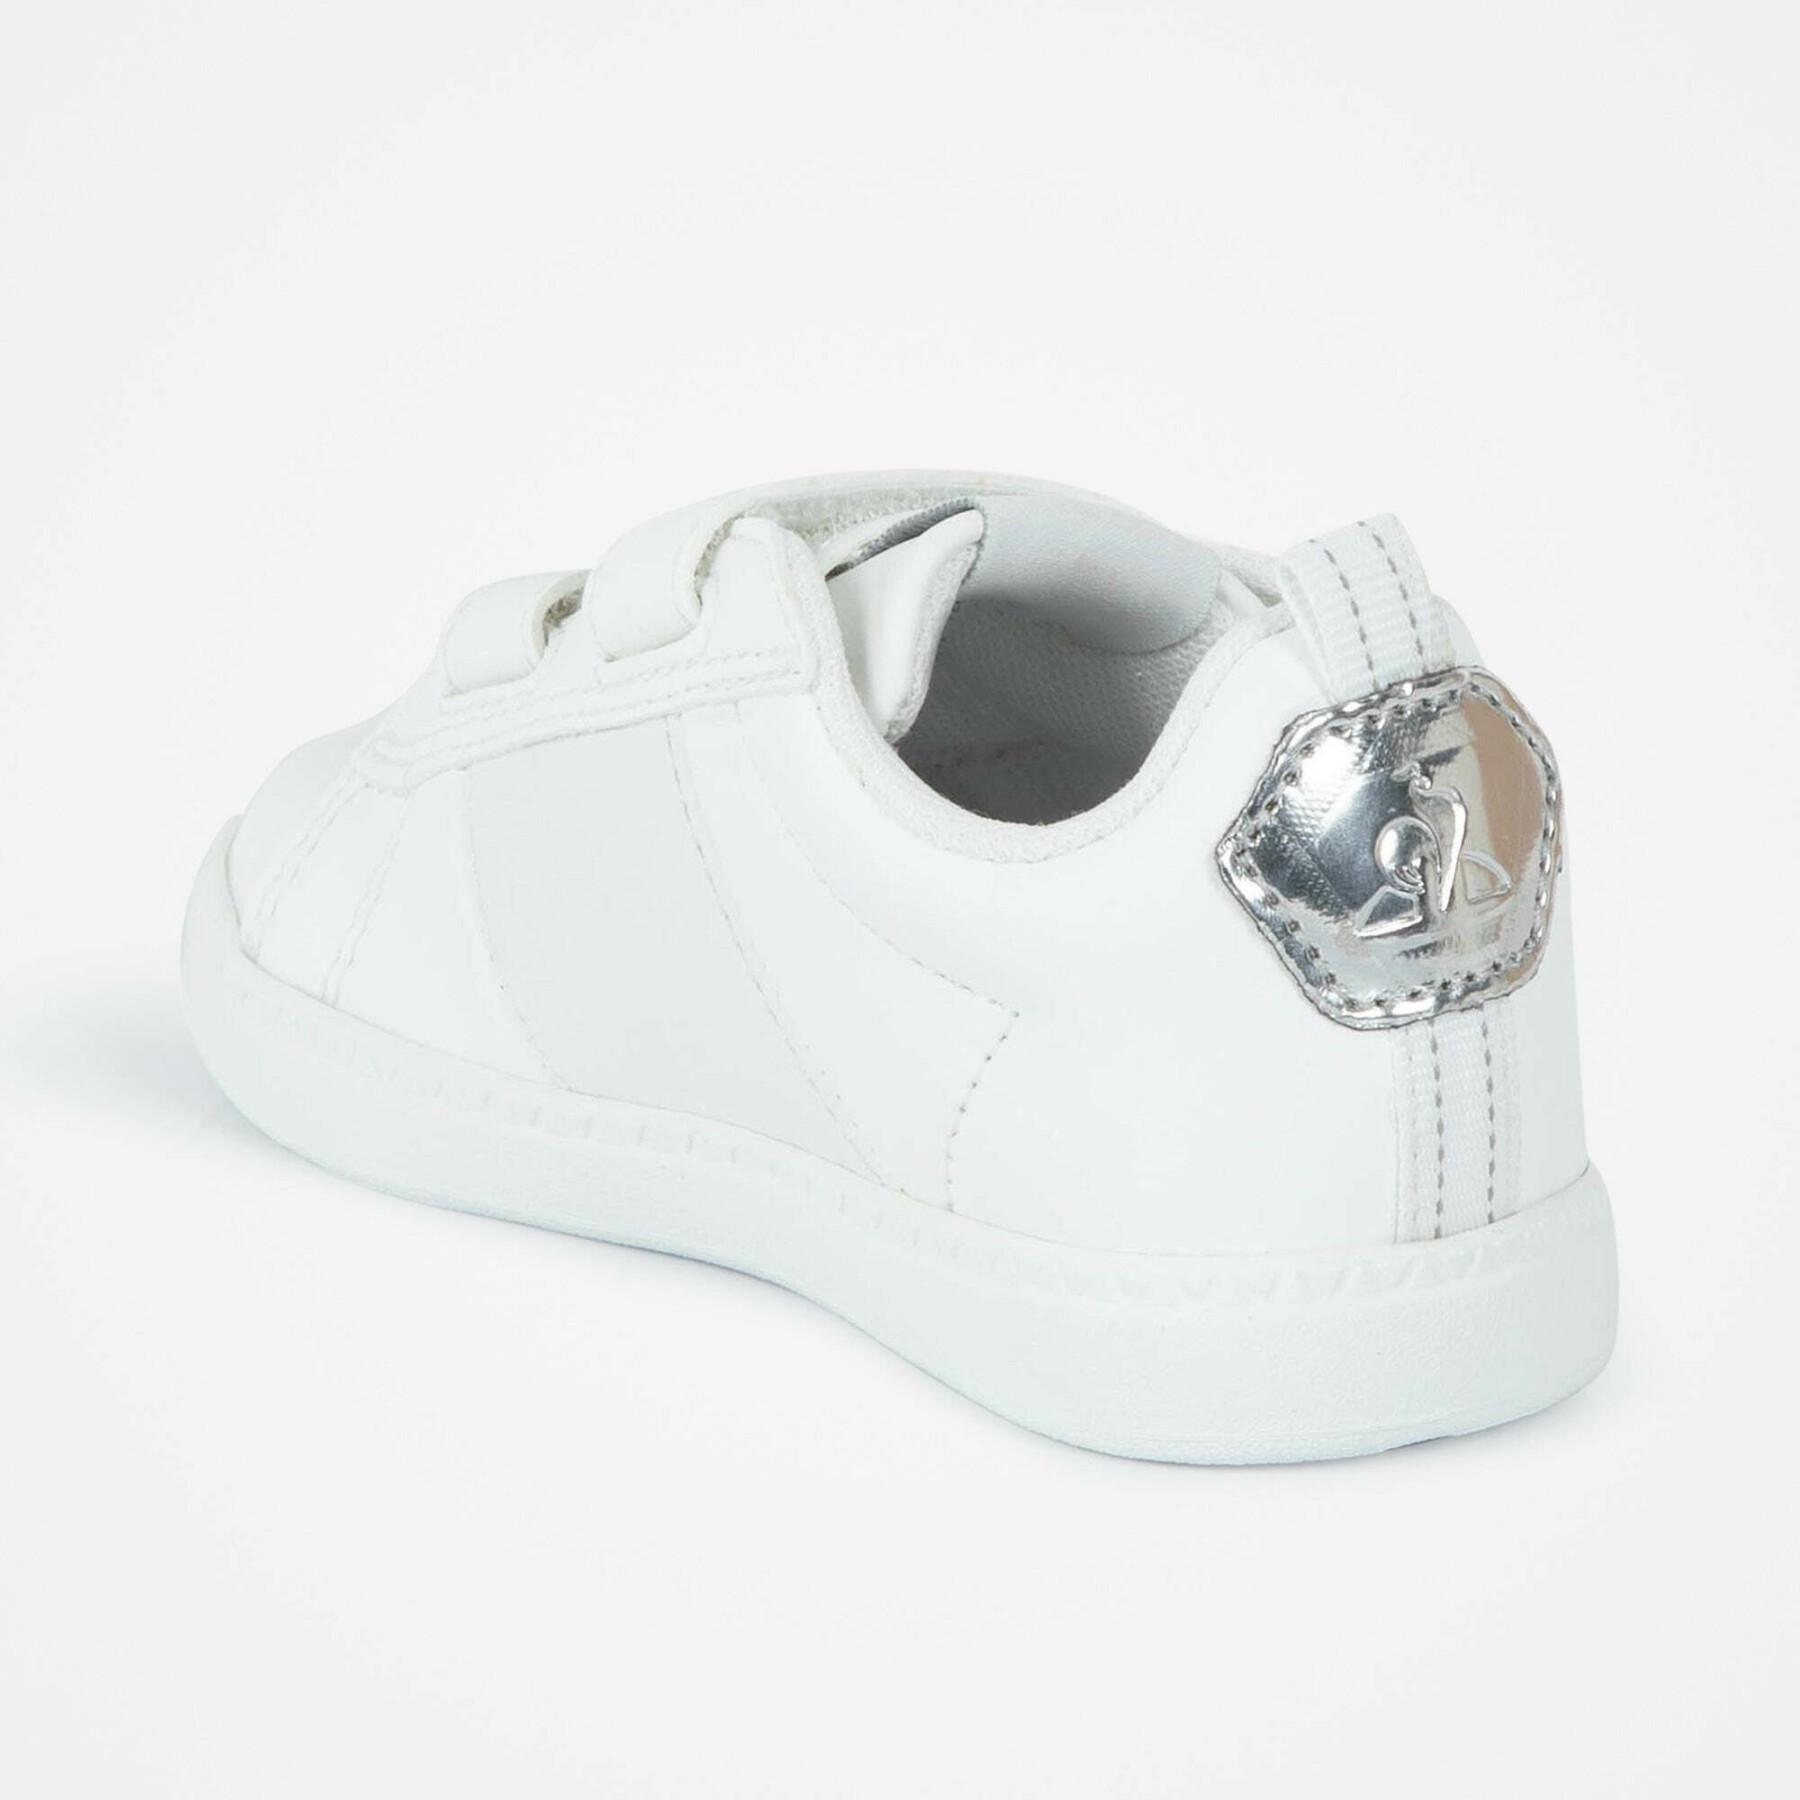 Babytrainers Le Coq Sportif Courtclassic Inf Diamond